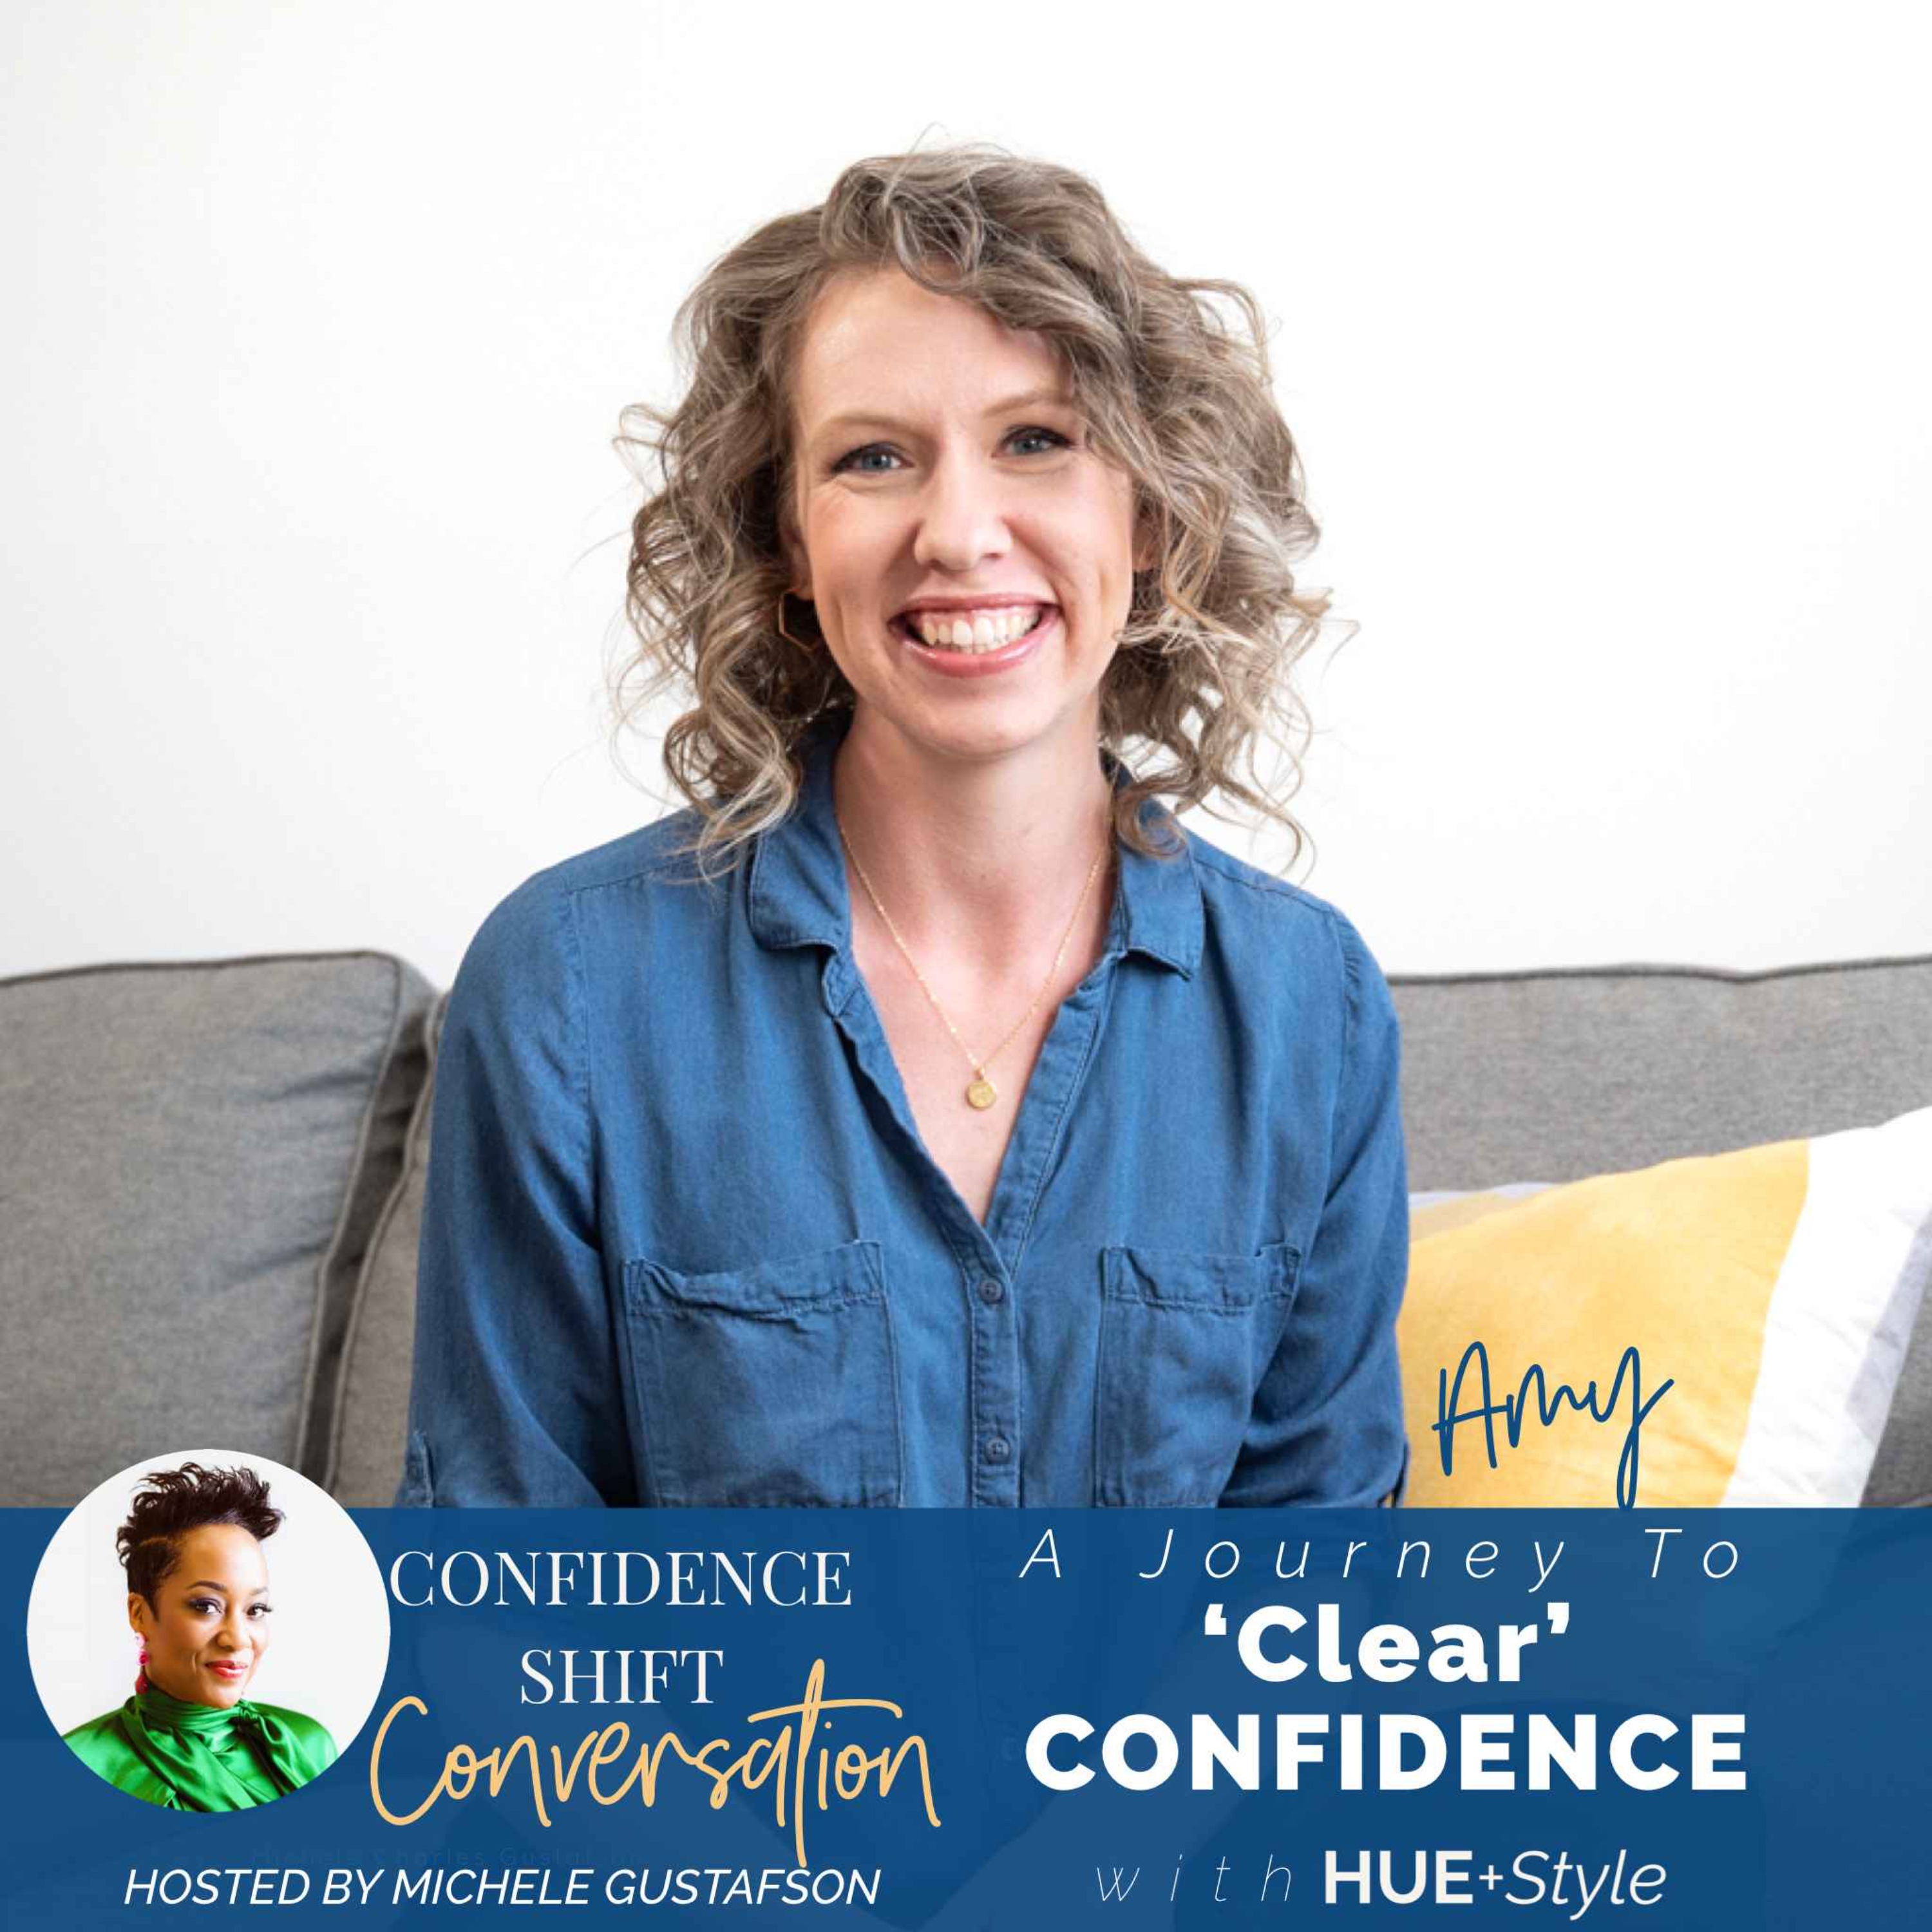 Journey To Clear Confidence with Amy: From Stuck to Soaring